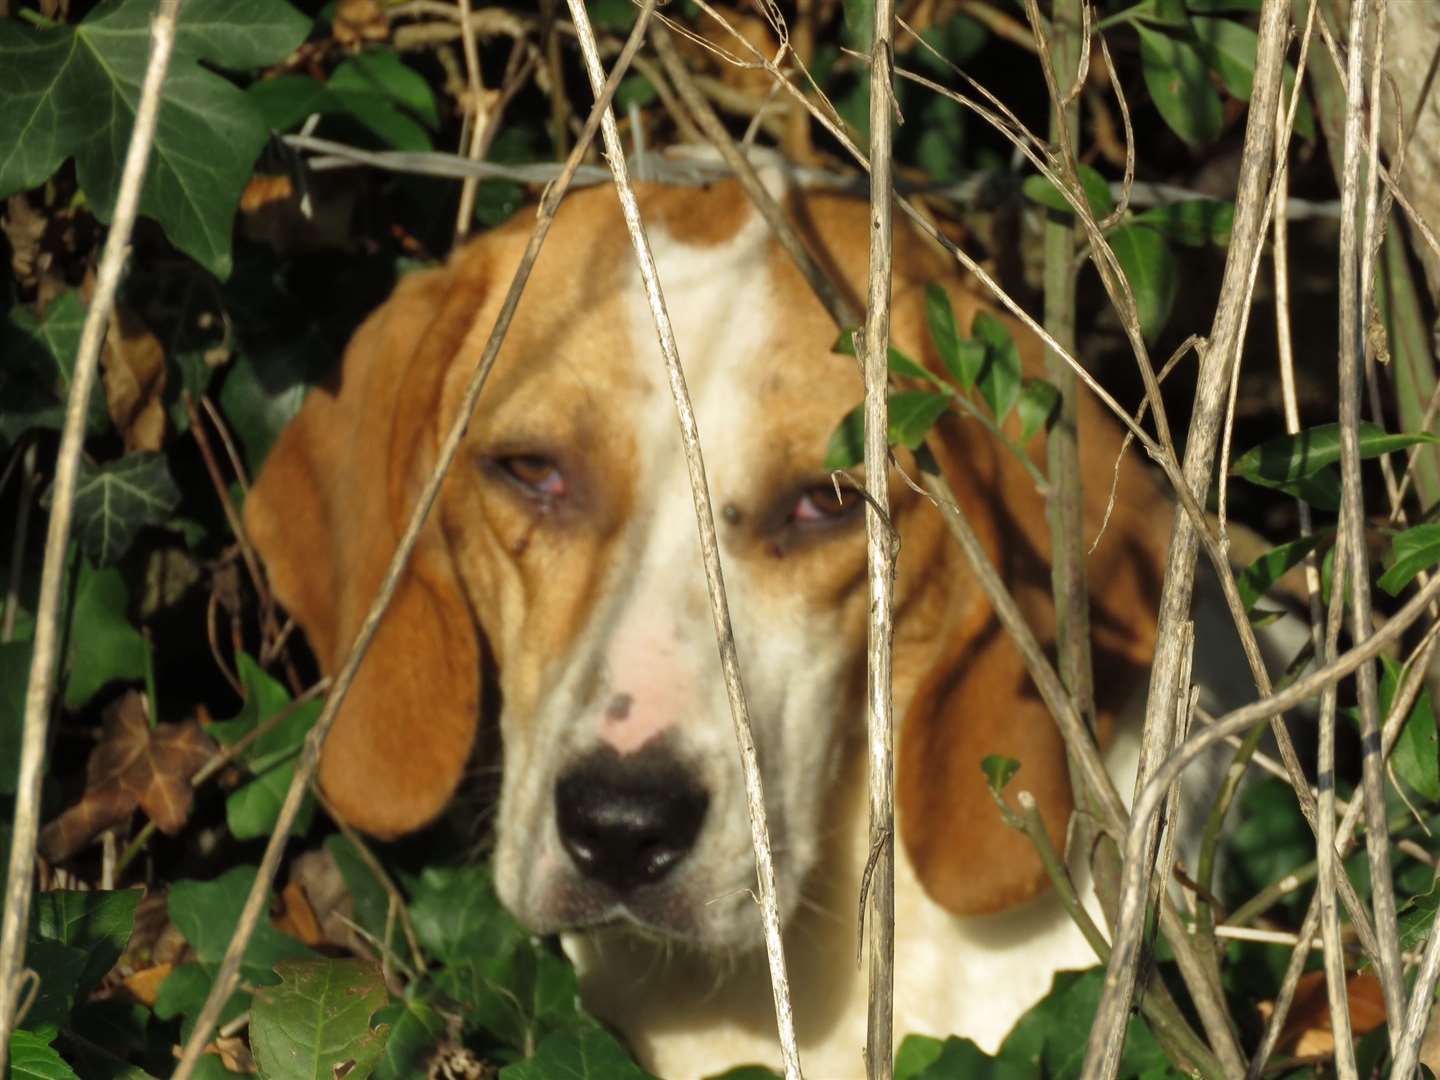 The Beagle cross was in the woods for at least six days